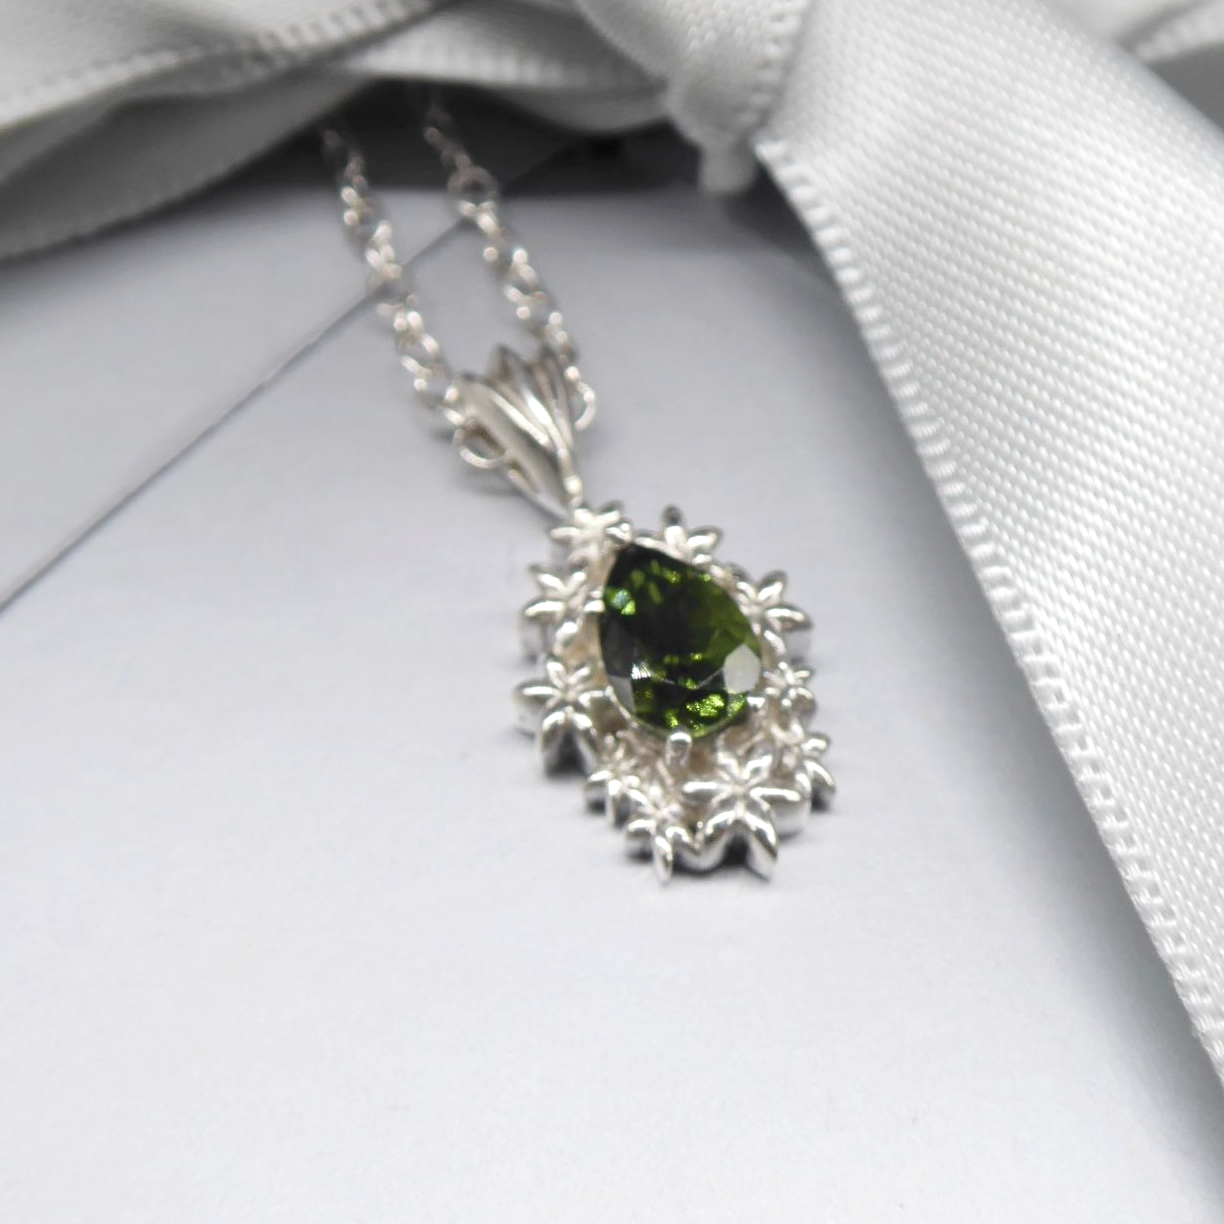 Silver and green tourmaline flower patterened pendant